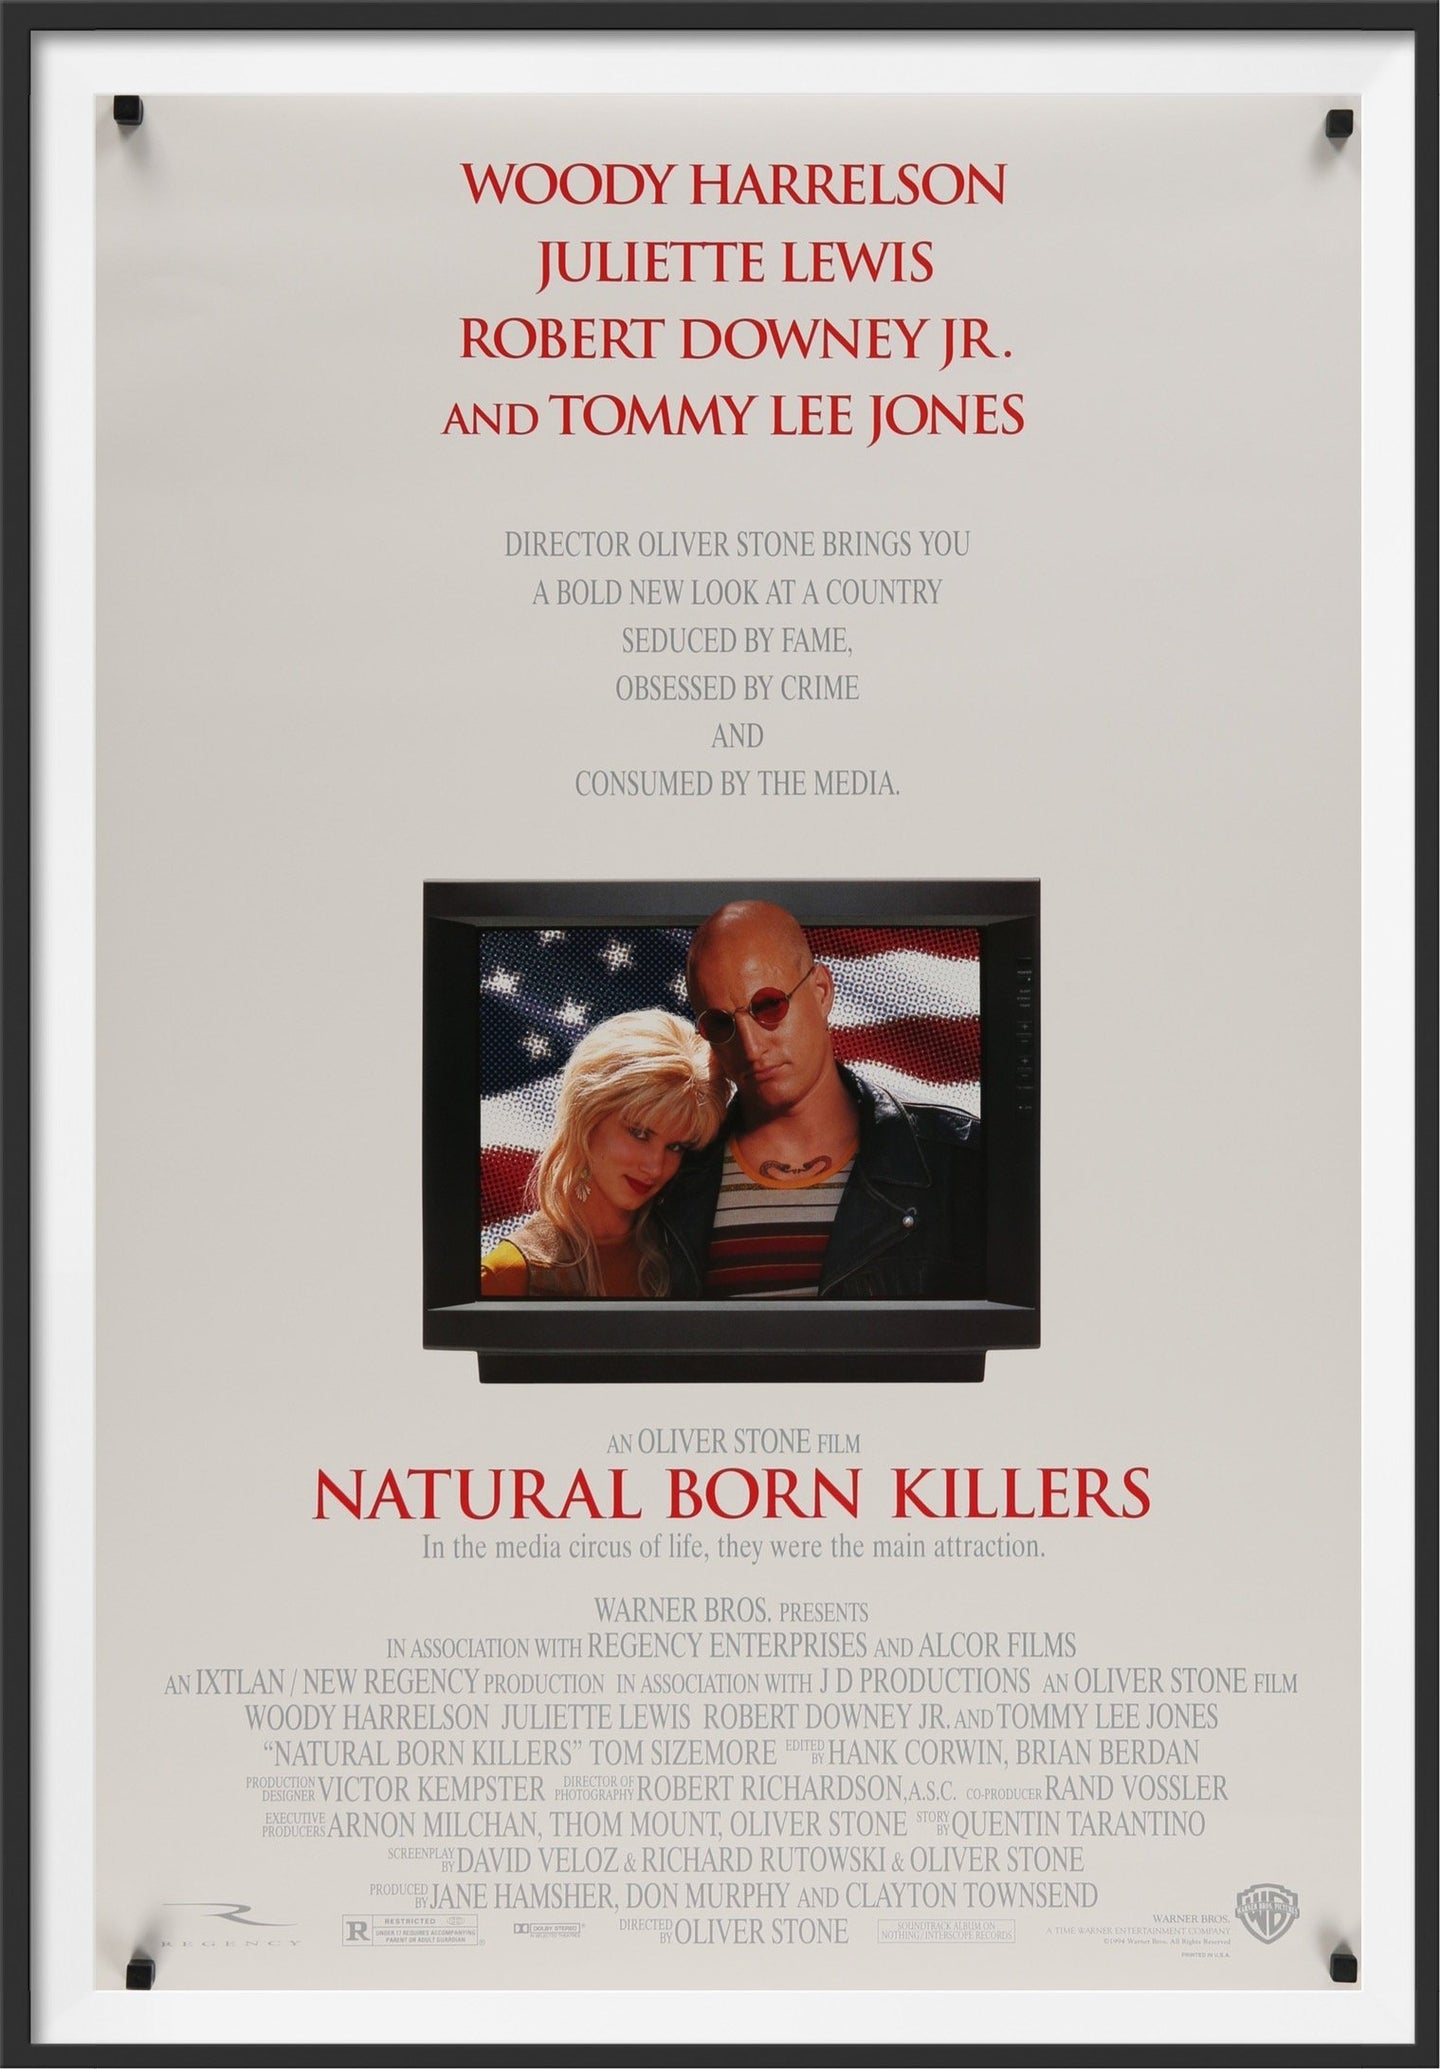 An original movie poster for the film Natural Born Killers